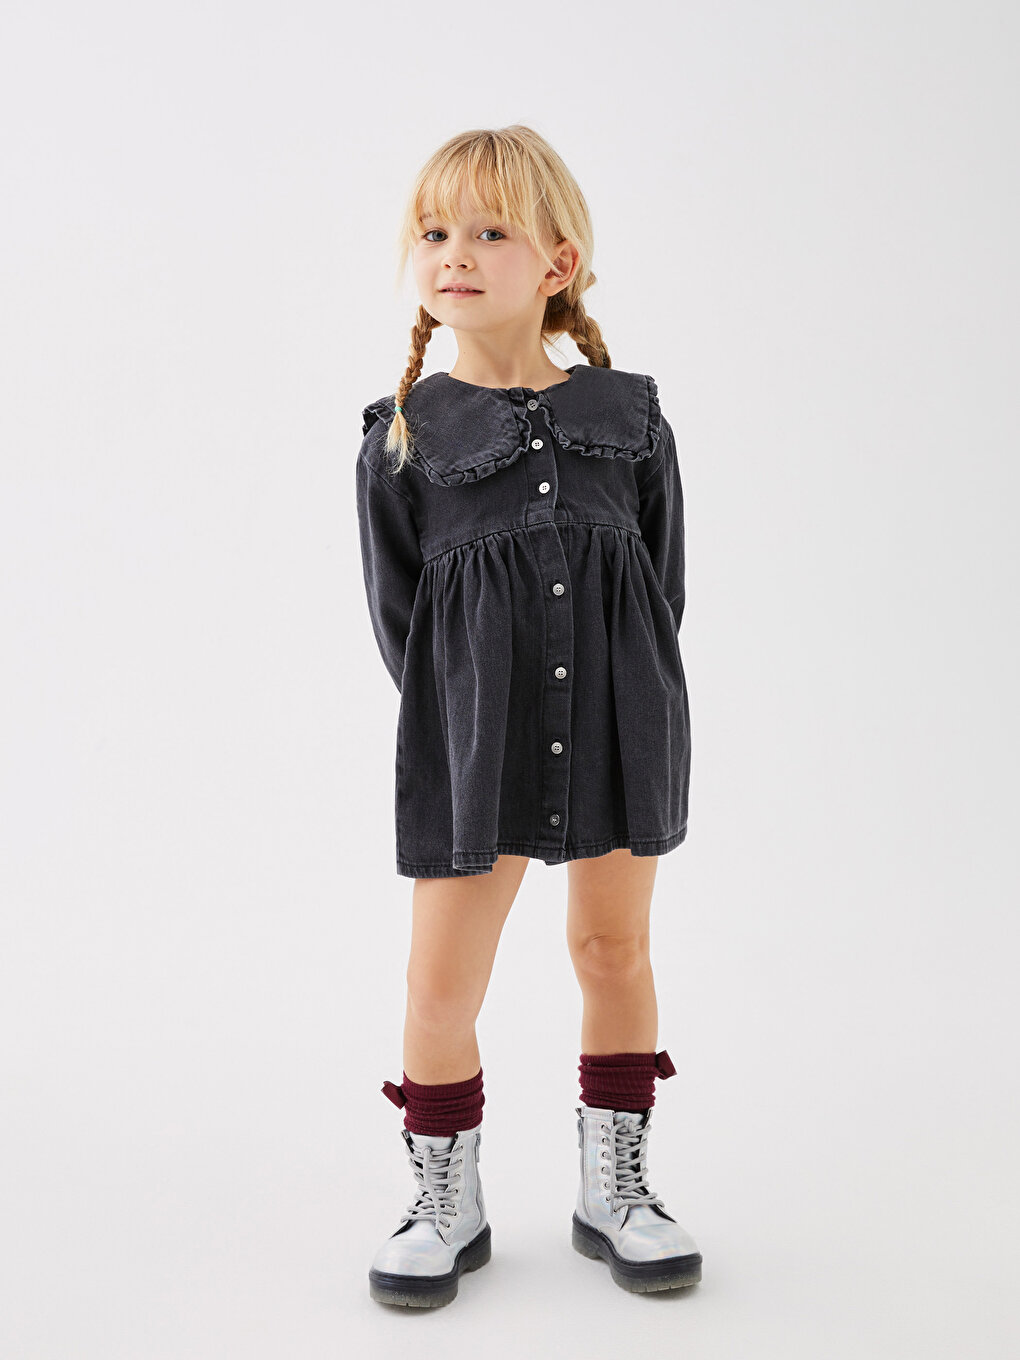 Buy Bold N Elegant Girl's Short Sleeve Front Open Stylish Cotton Denim Dress  Frock Tunic with PU Leather Belt and Pockets for Infant Toddler Baby Girls  (6-12 Months, Dark Blue) at Amazon.in